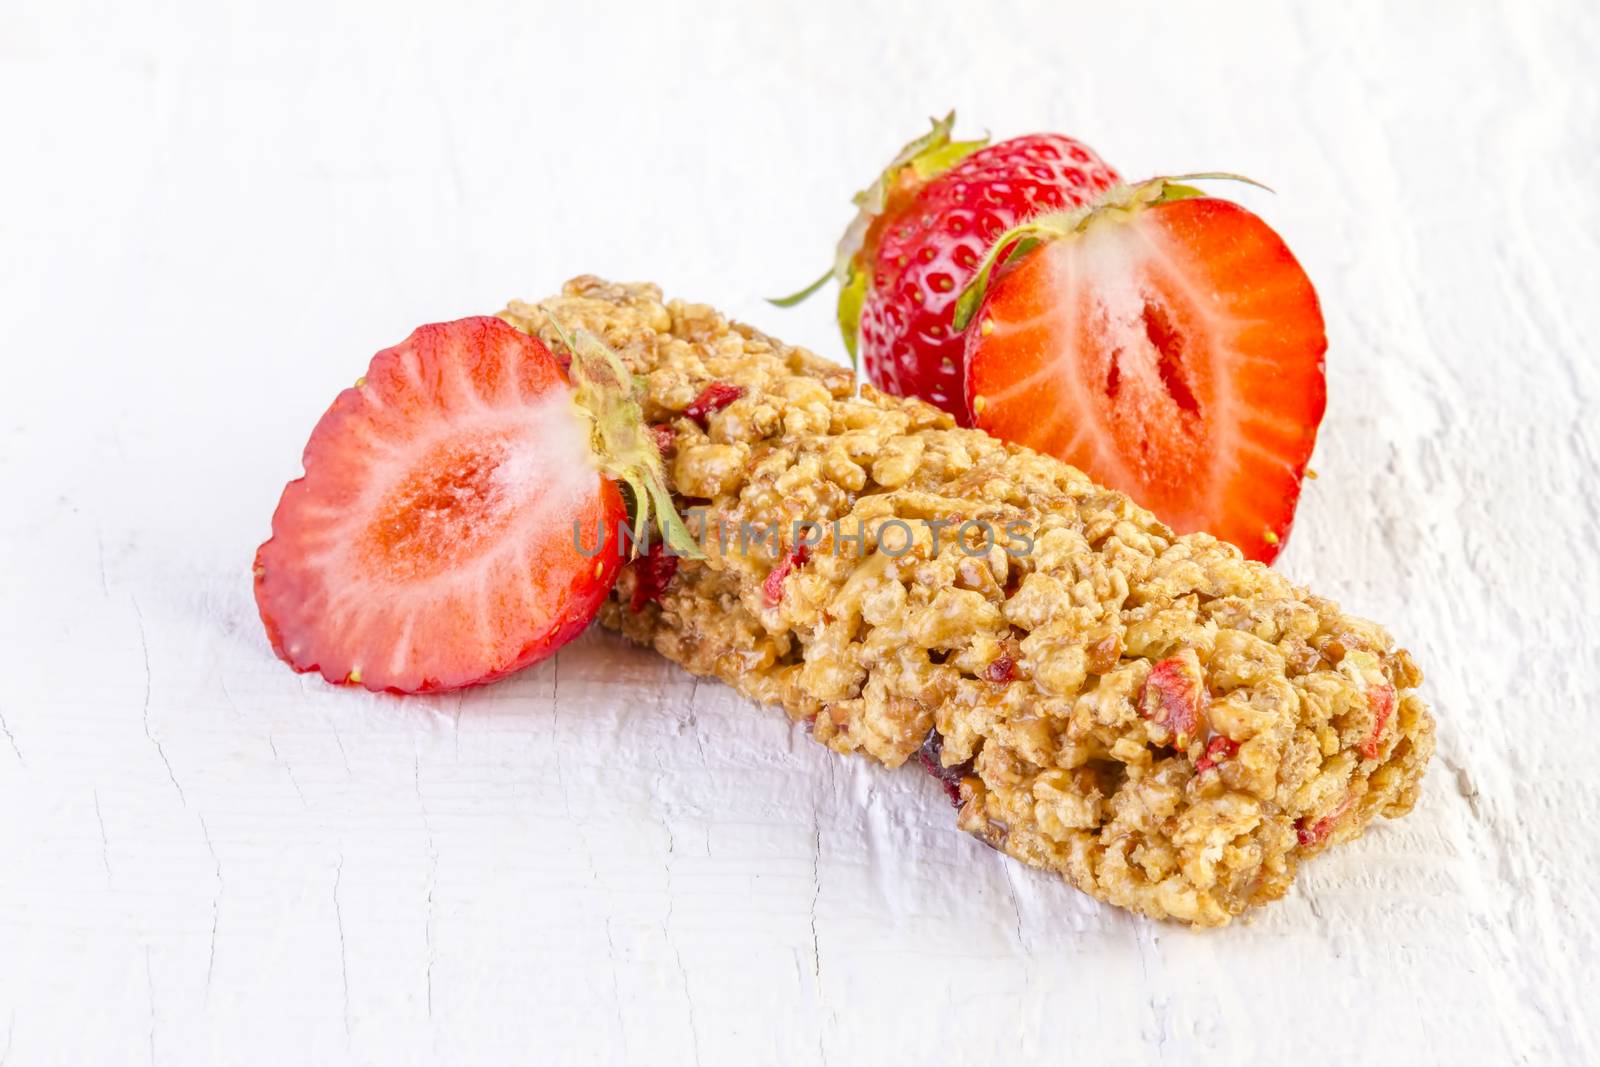 muesli bars with fresh strawberry on white wooden by manaemedia